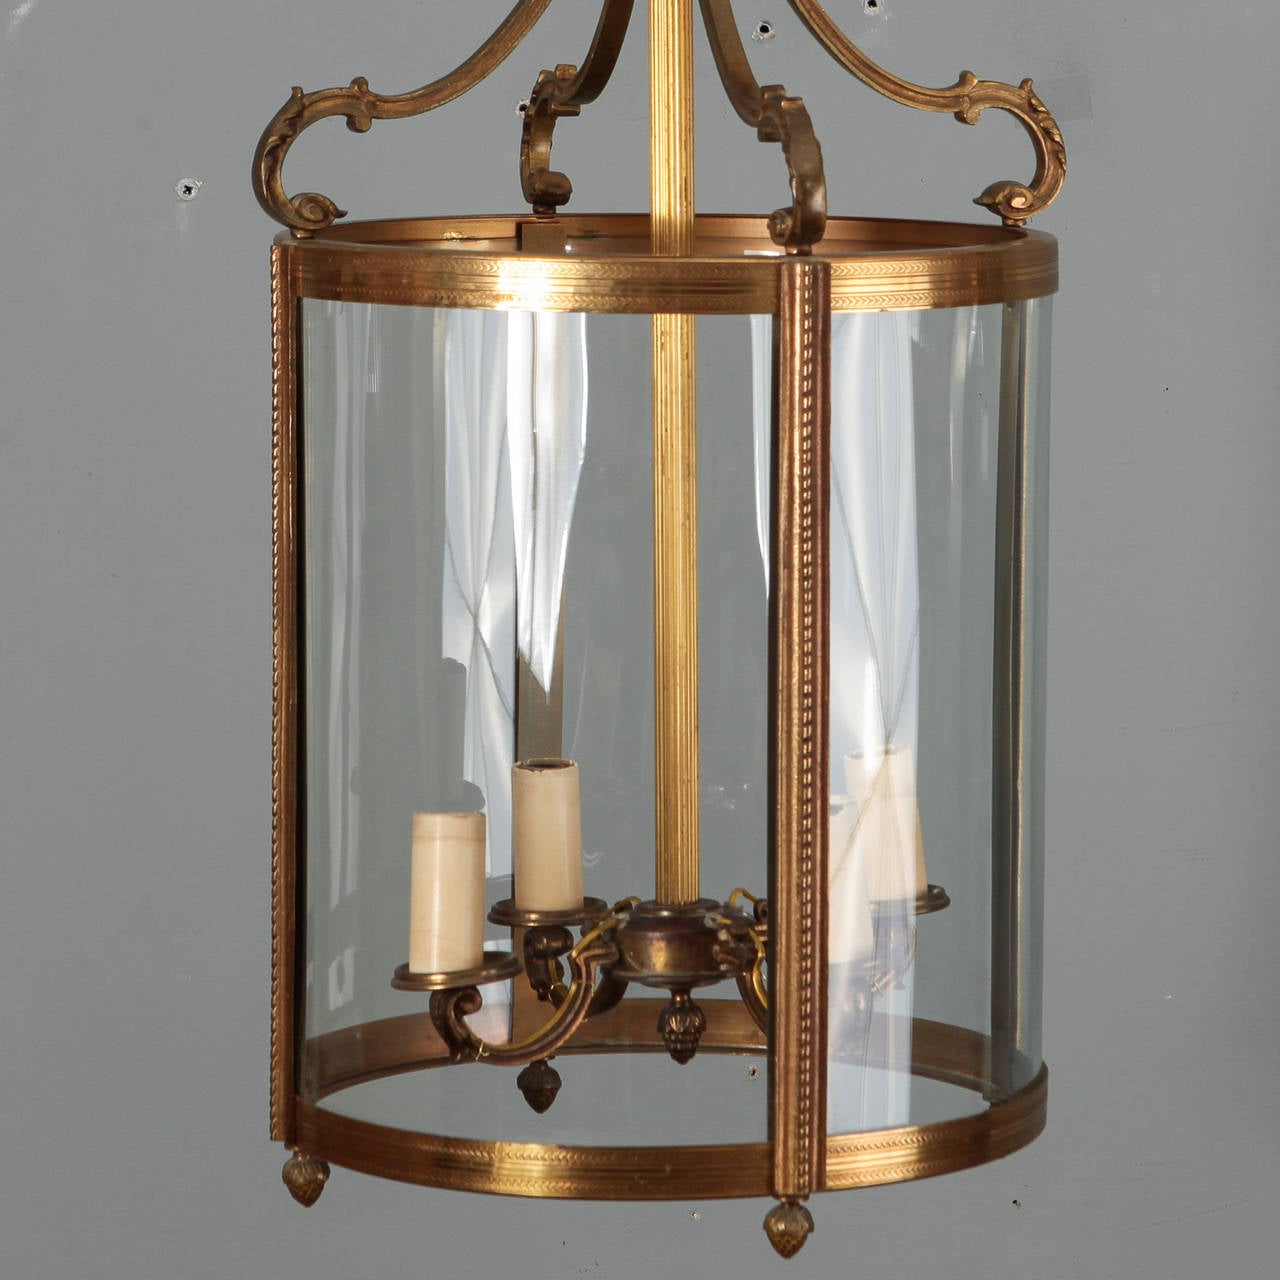 Circa 1920s Dutch bronze lantern fixture with clear glass sides and four internal candle style lights. Design features clean, classic lines with ribbed and braided textural details and a footed base. New electrical wiring for US standards.